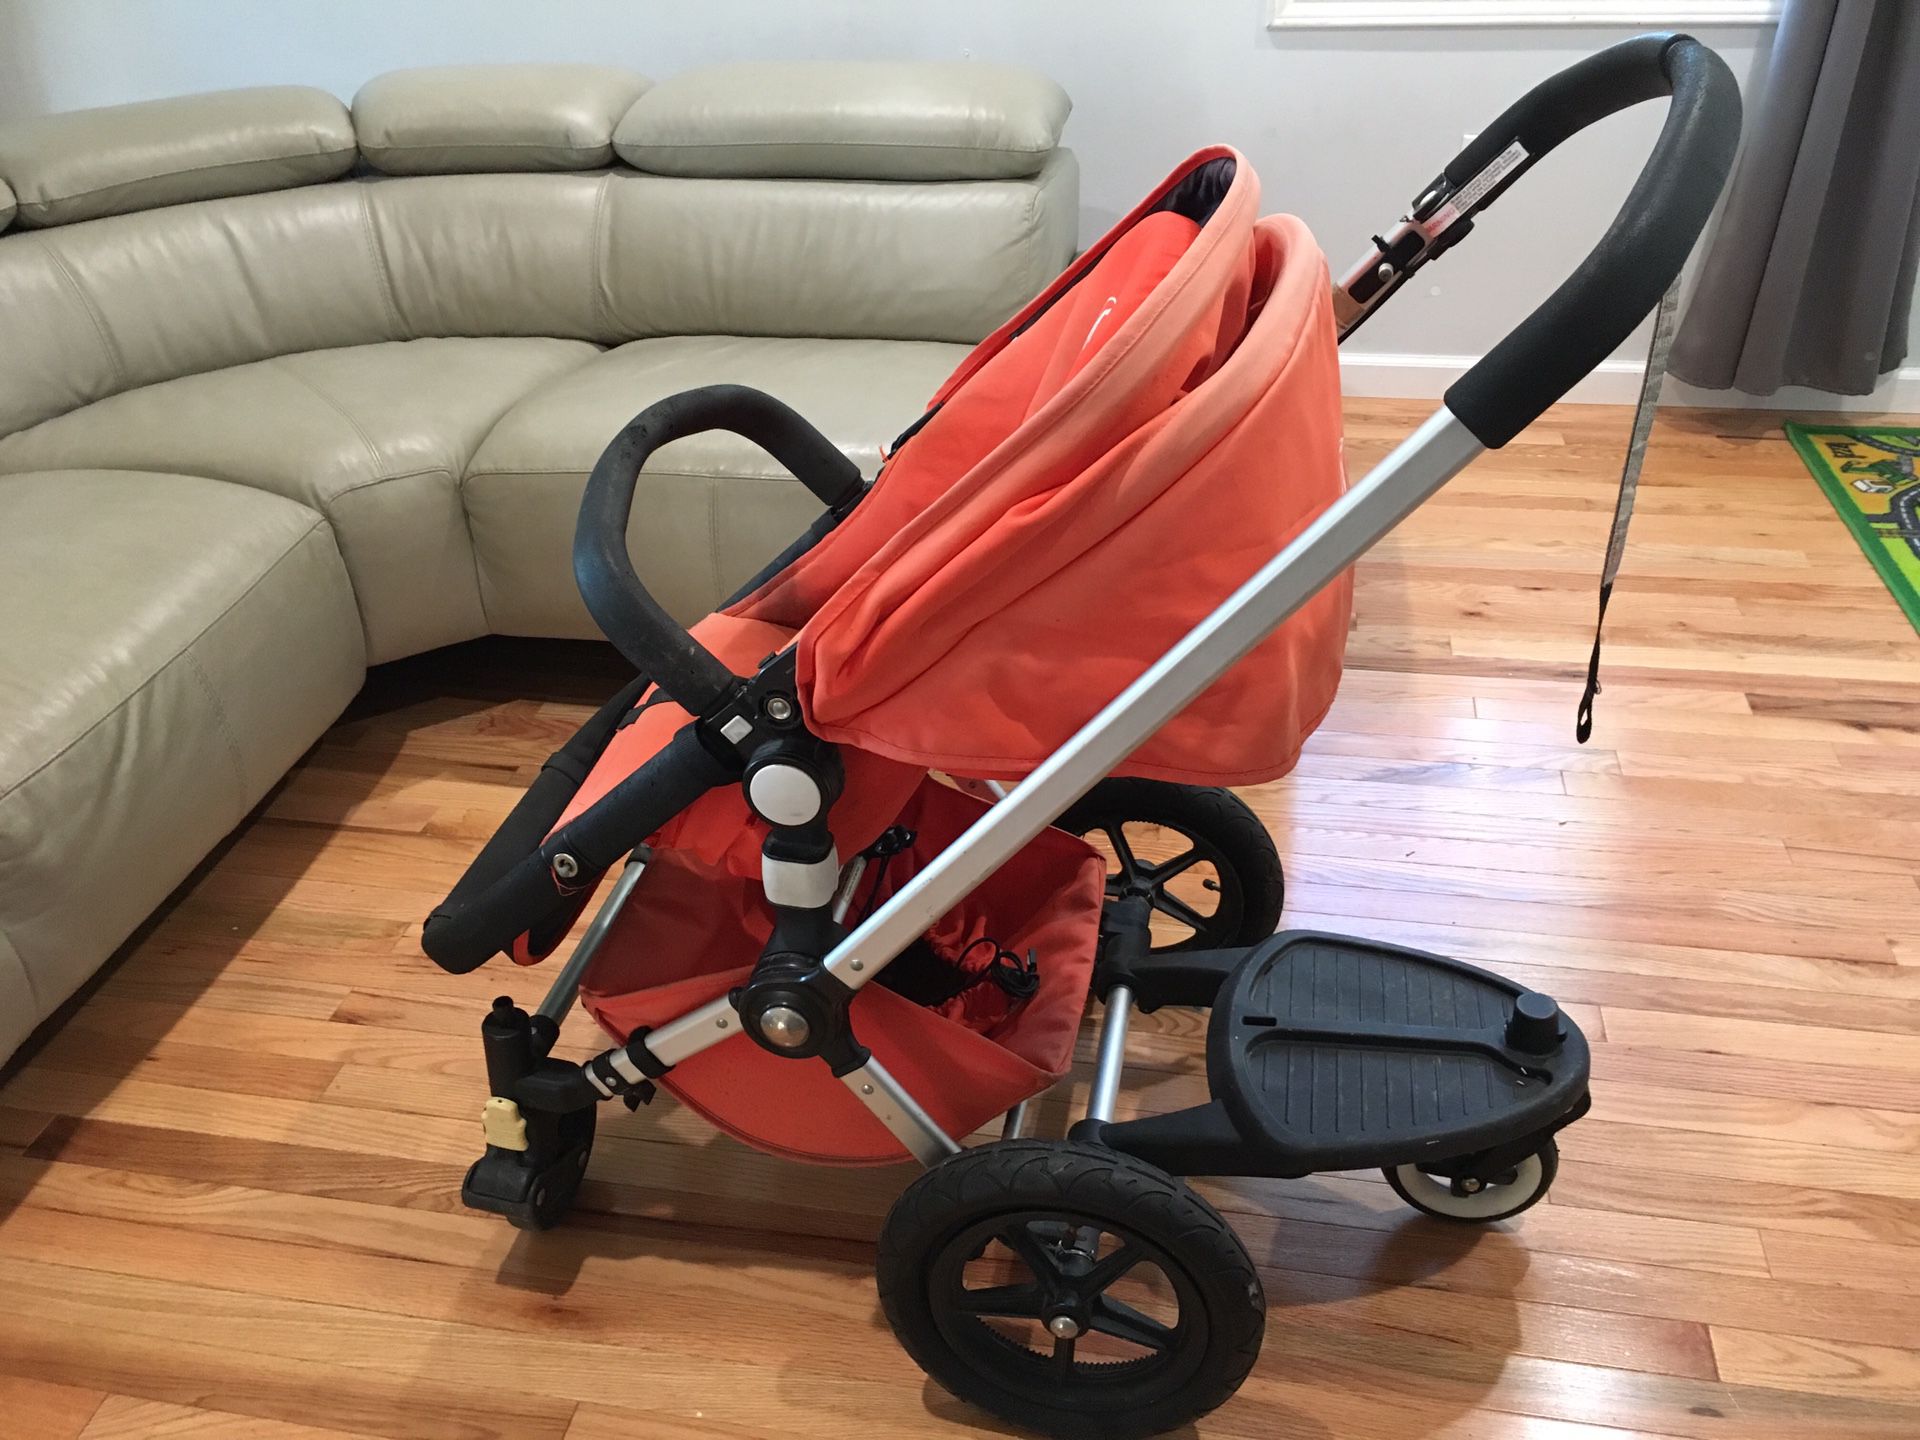 Bugaboo Frog stroller in good condition